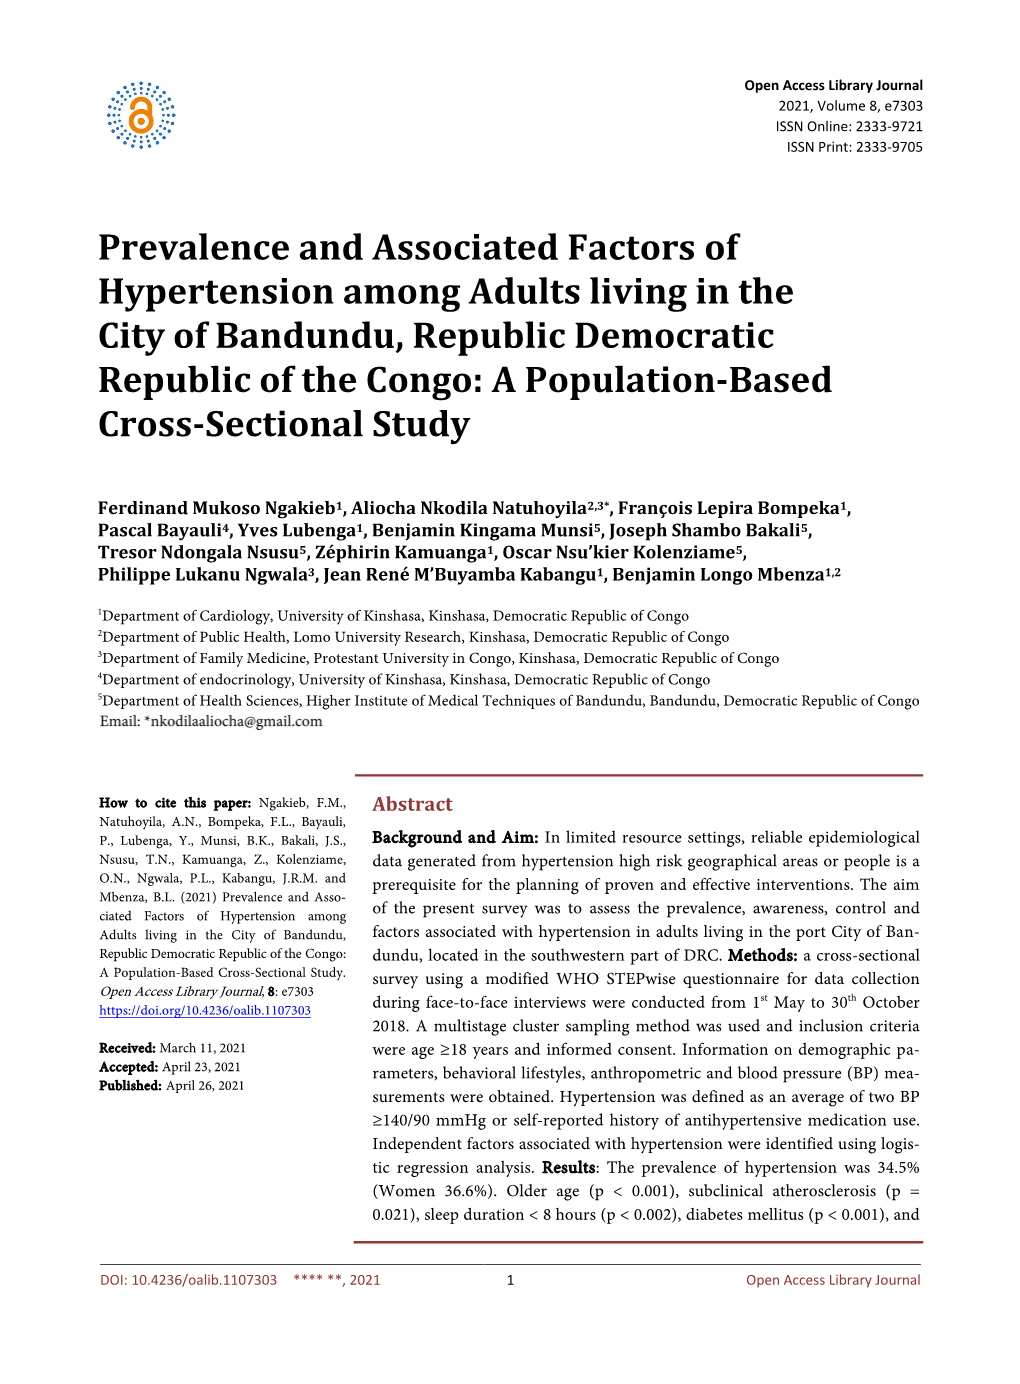 Prevalence and Associated Factors of Hypertension Among Adults Living